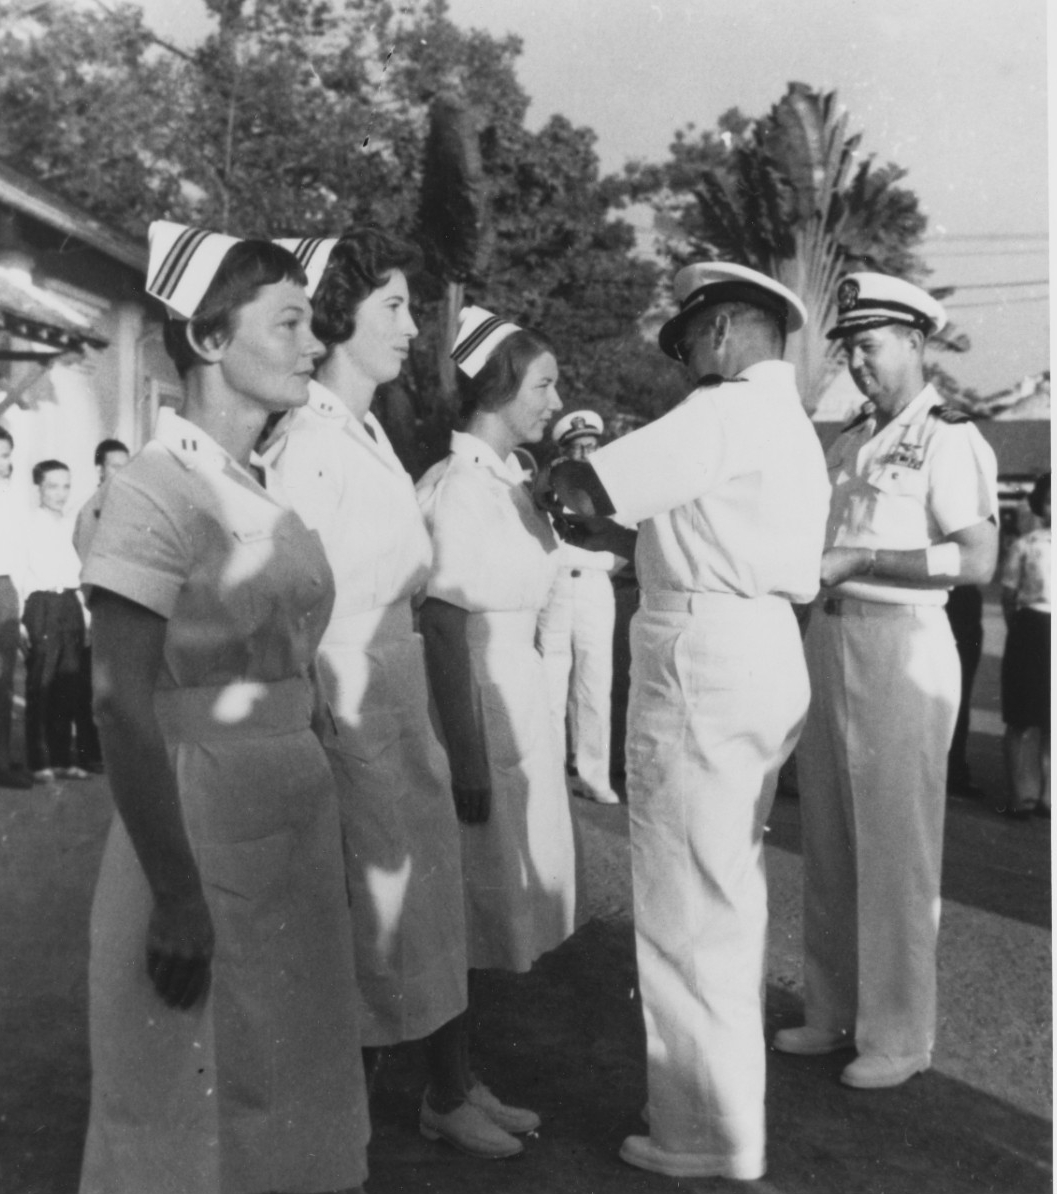 Male officer in white uniform pins an award on a woman in white nursing uniform as two other nurses stand to her right.